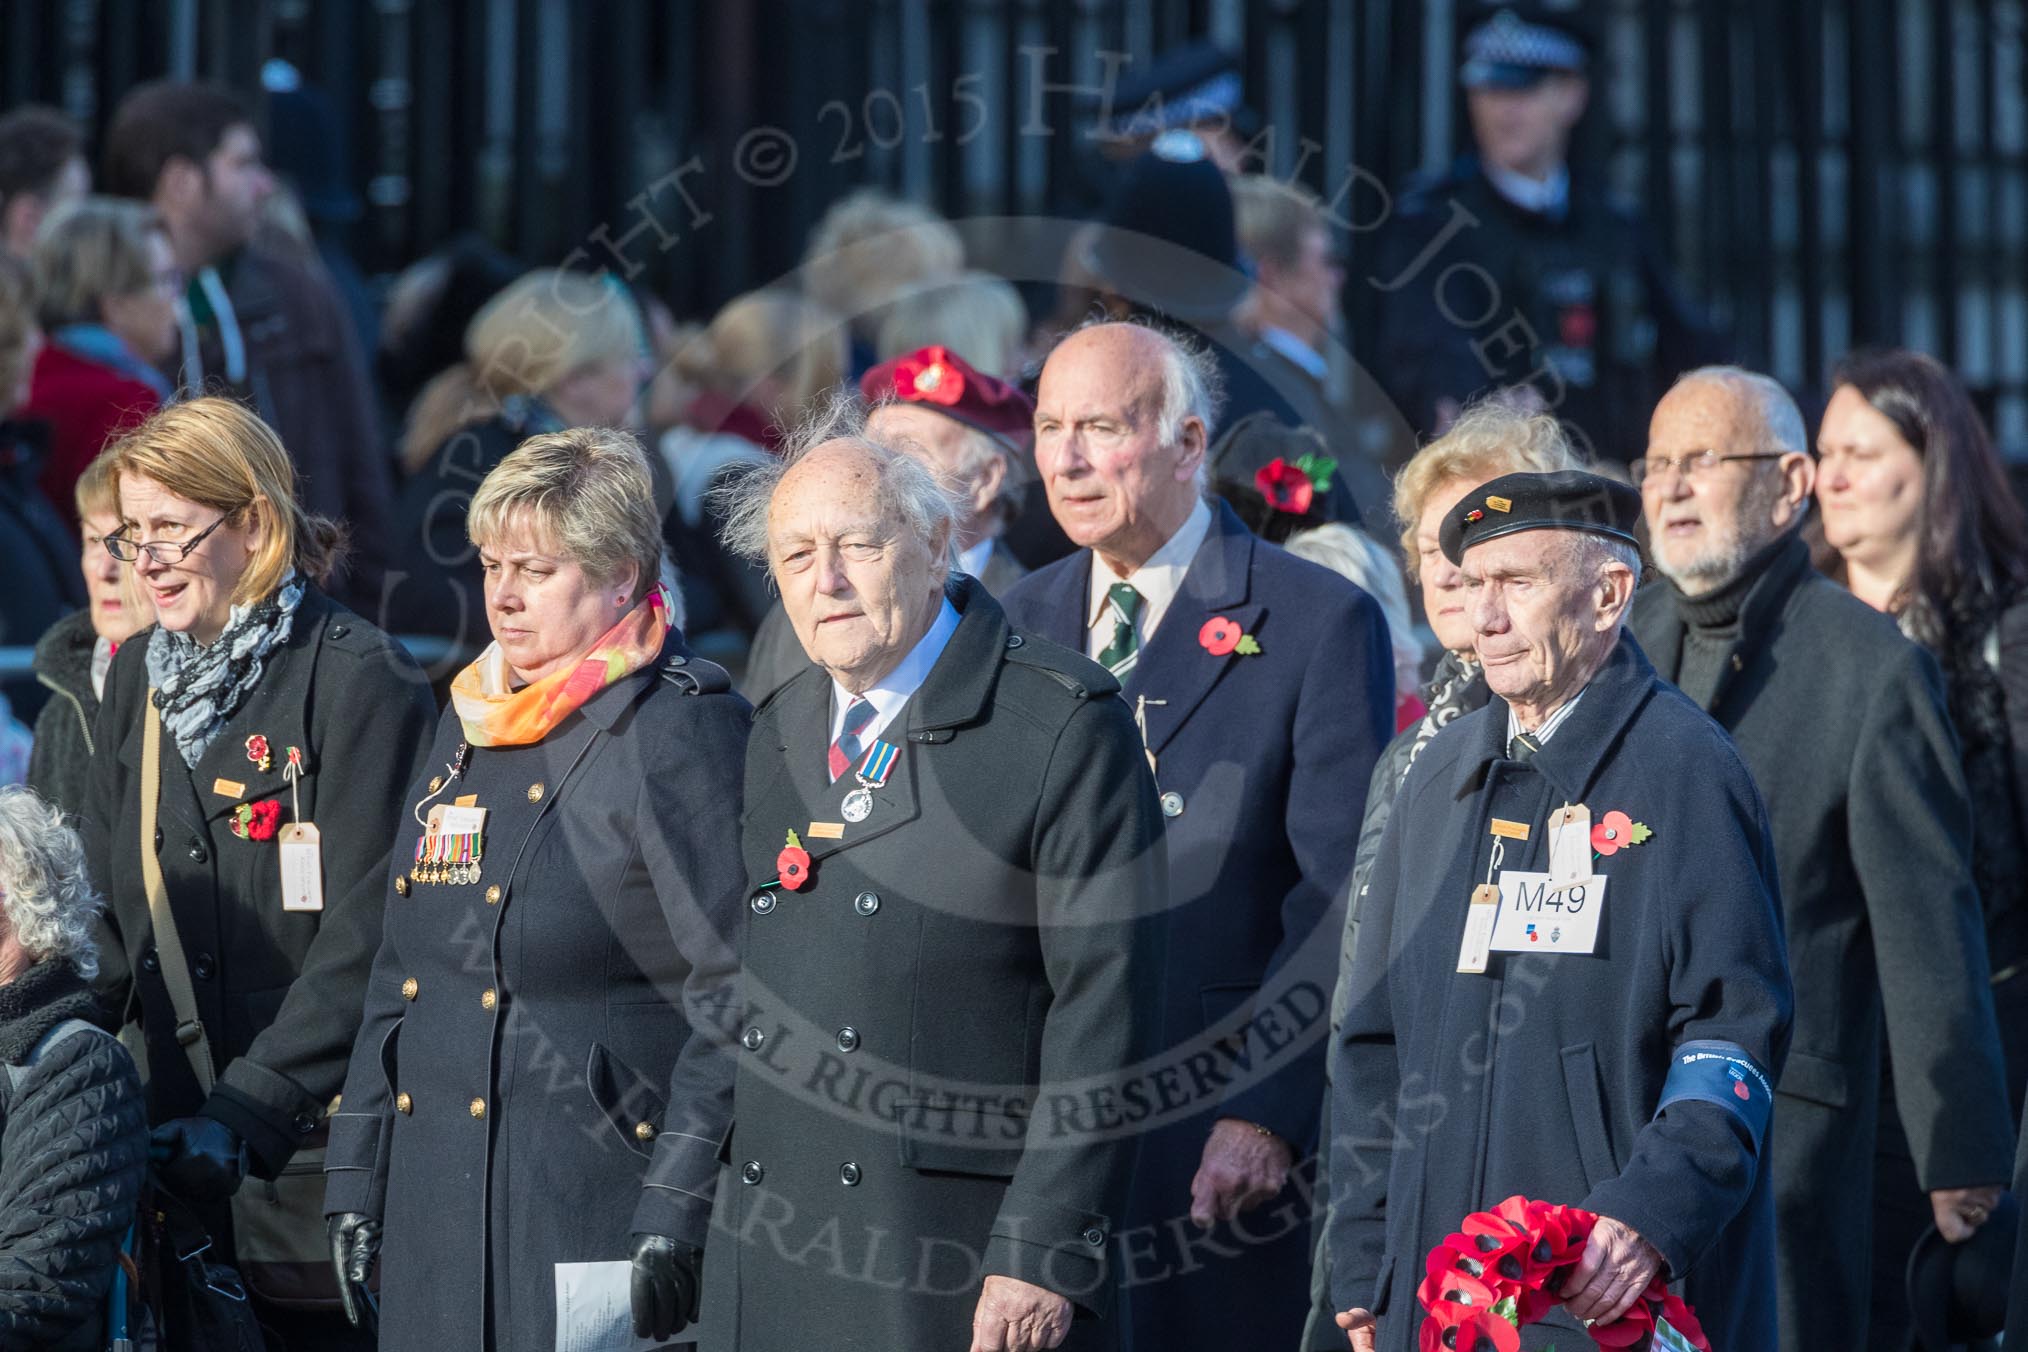 March Past, Remembrance Sunday at the Cenotaph 2016: M49 The British Evacuees Association.
Cenotaph, Whitehall, London SW1,
London,
Greater London,
United Kingdom,
on 13 November 2016 at 13:20, image #3017